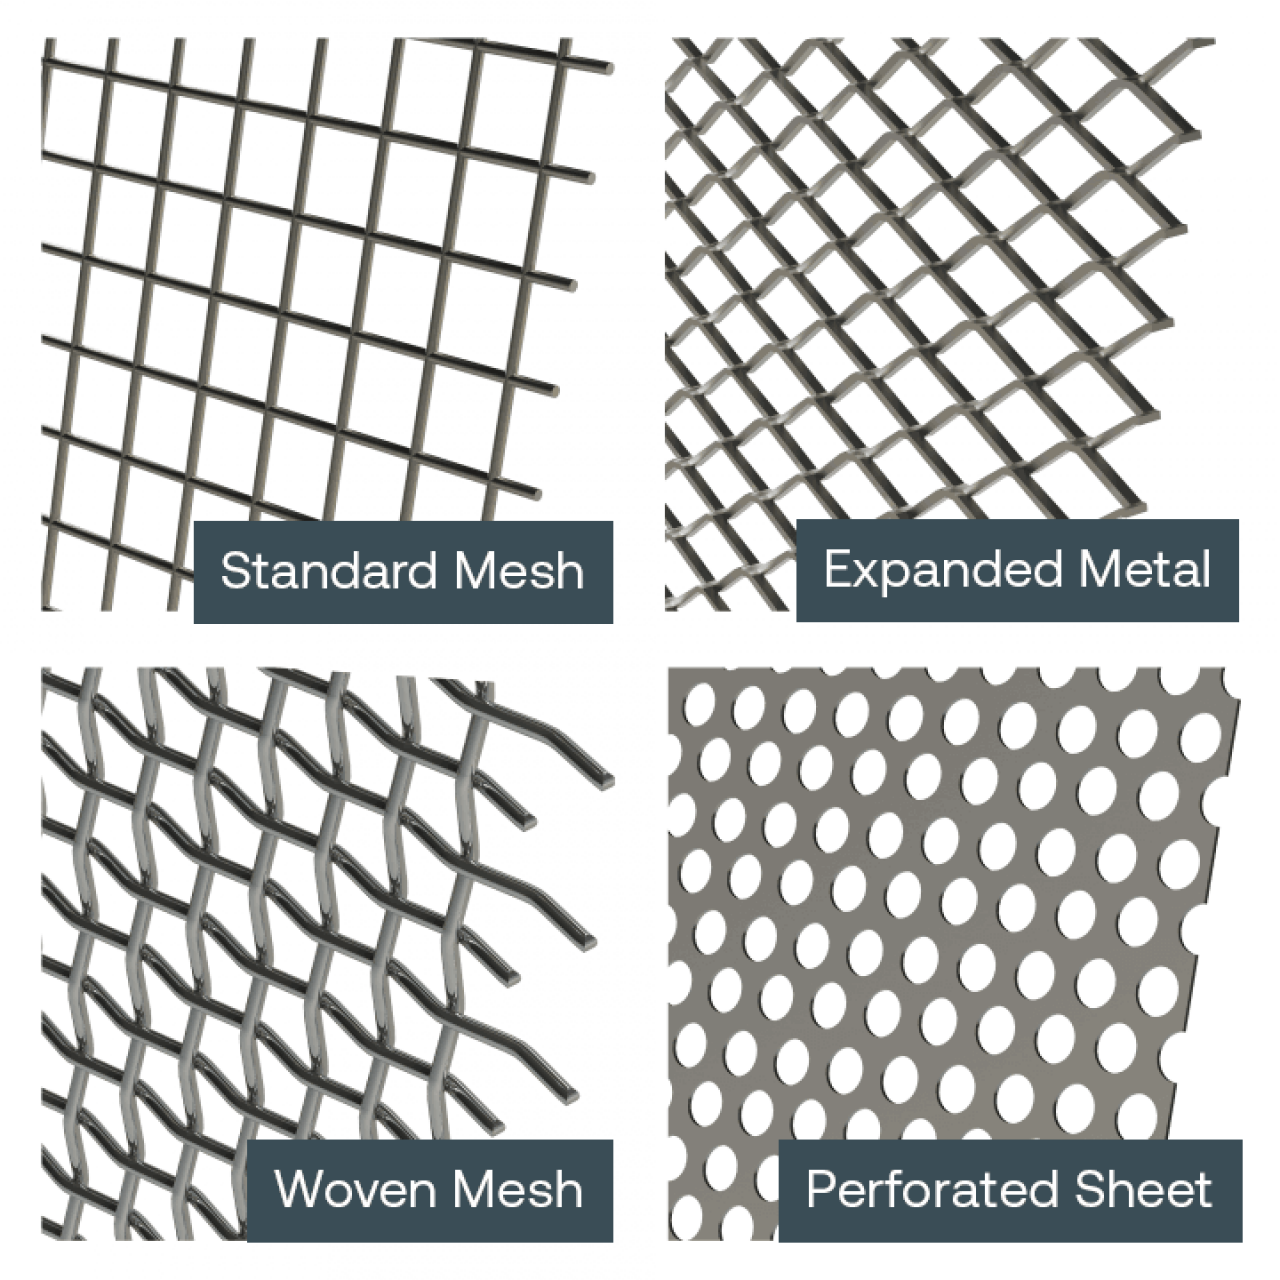 Other mesh options.